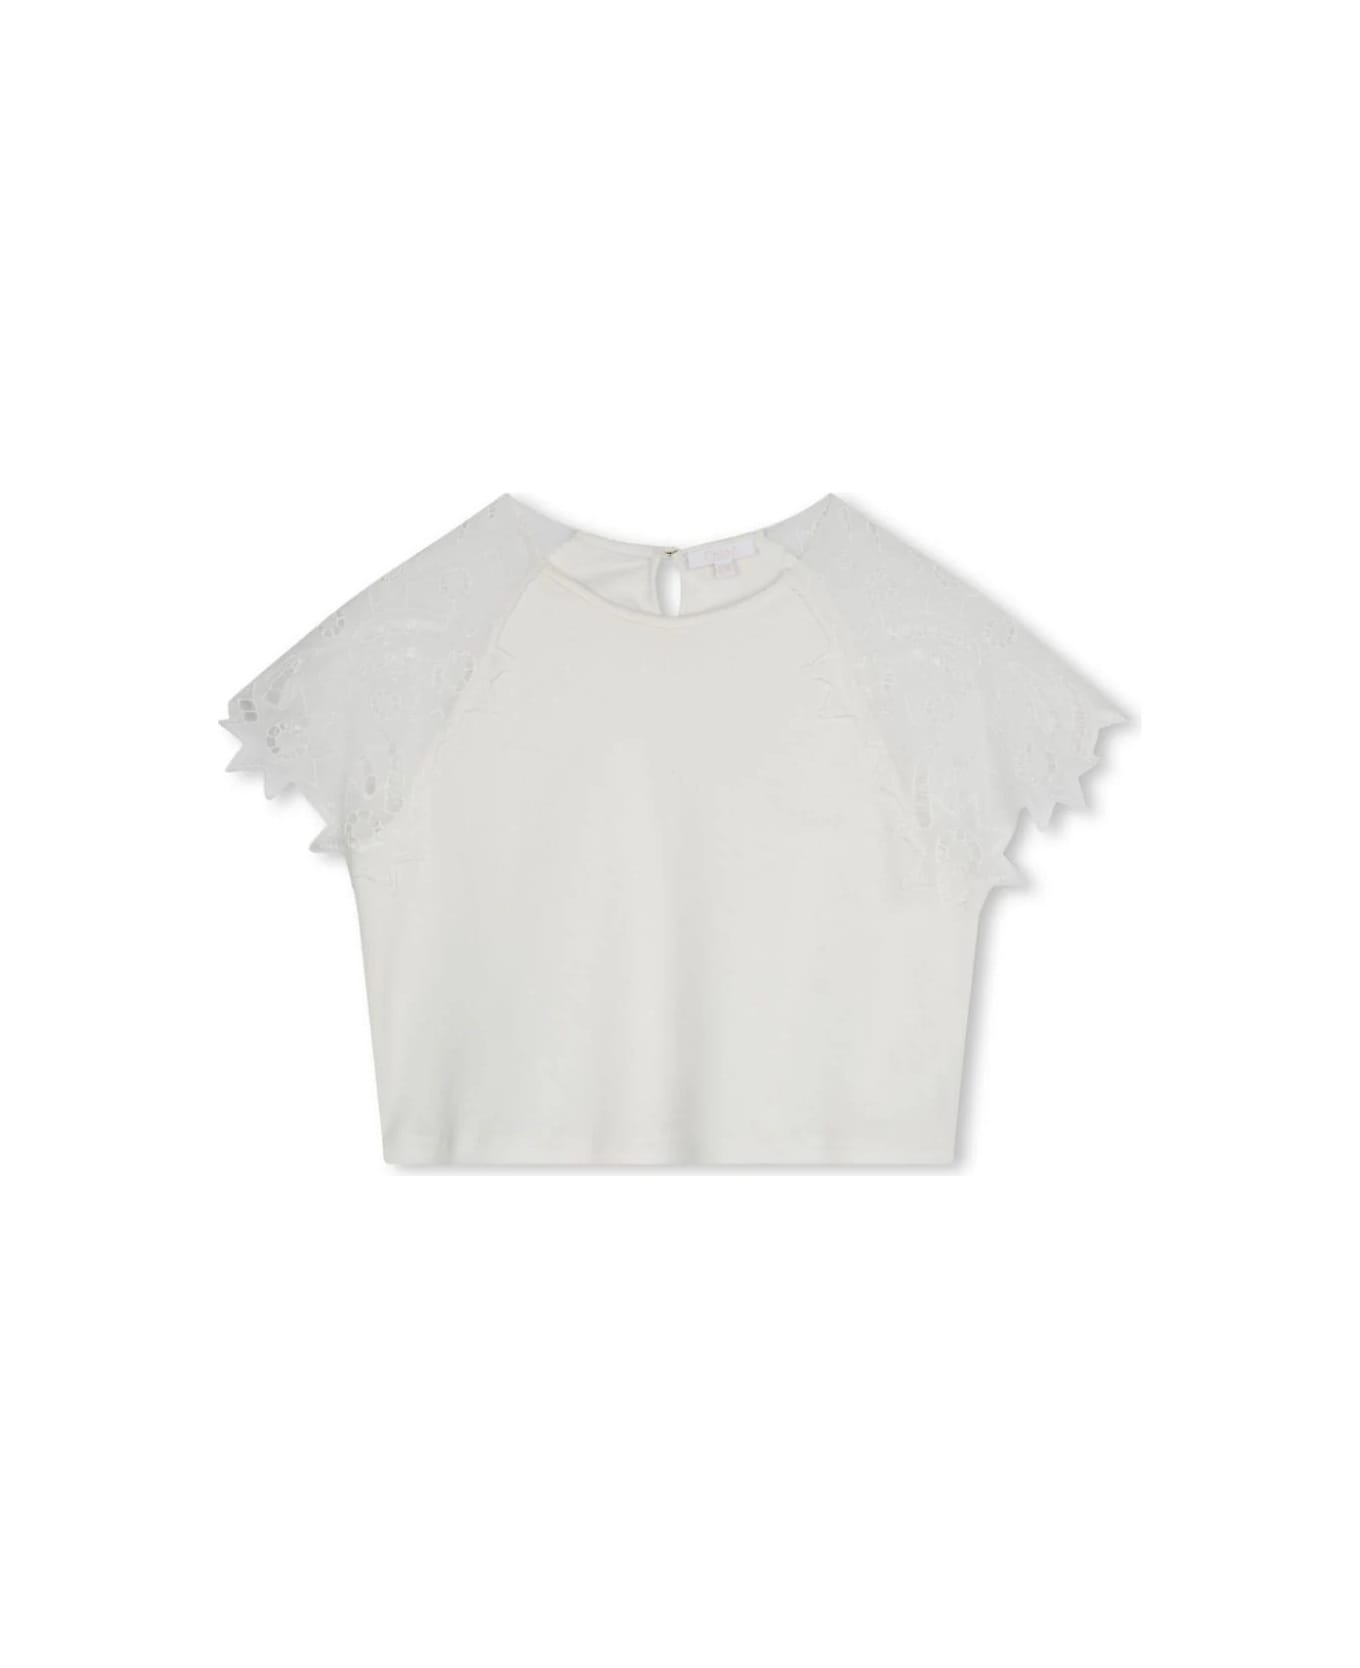 Chloé White Top With Guipure Lace - White トップス